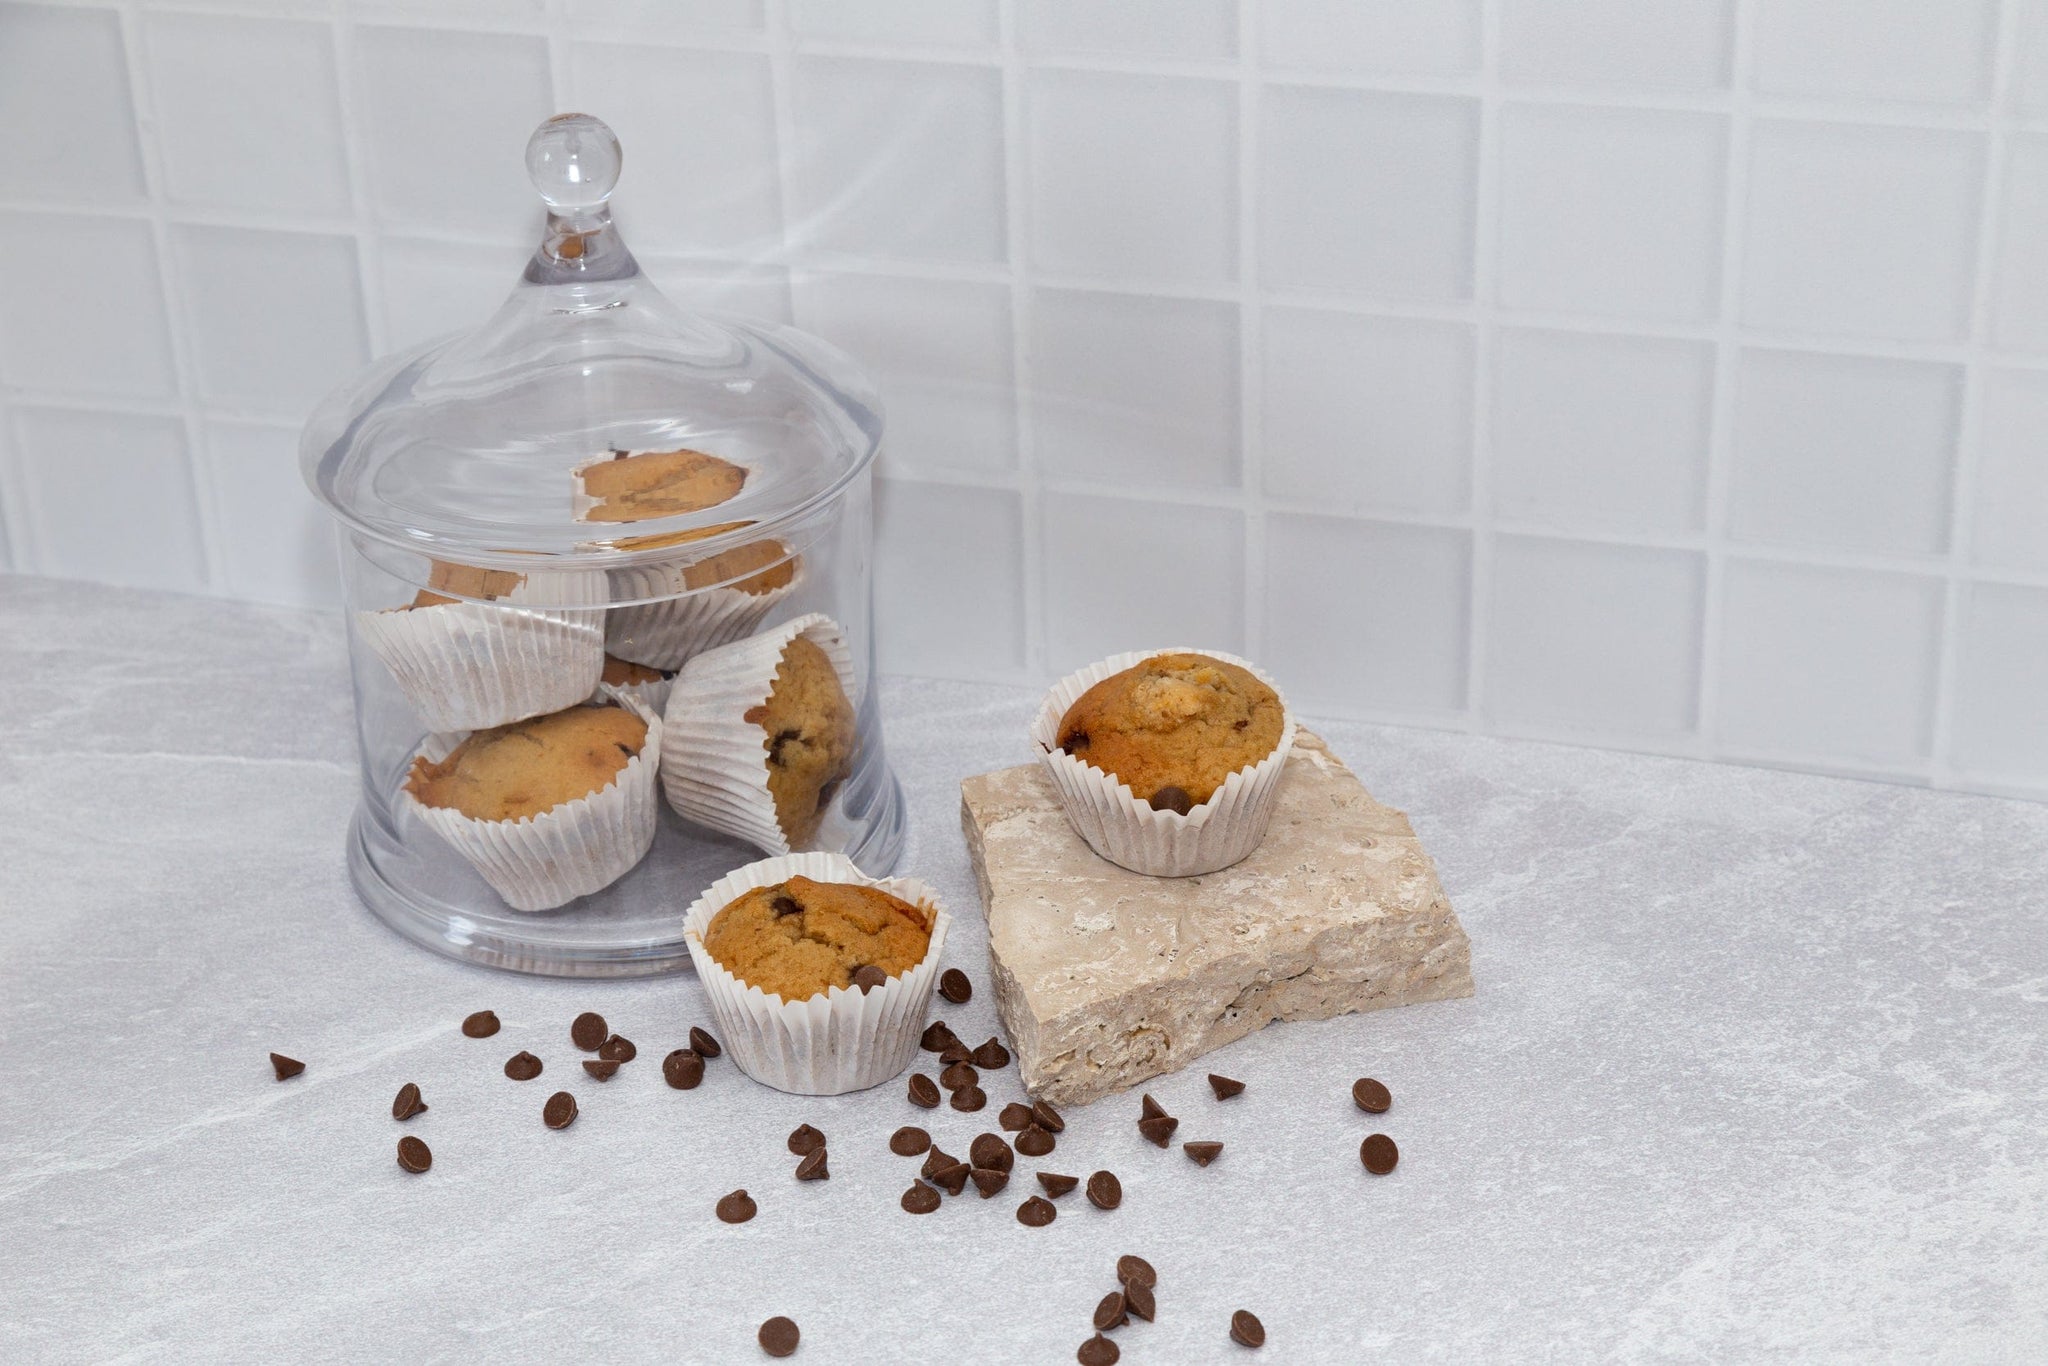 choc chip muffins with Travertine stone photography props and concrete and tile vinyl backdrop - backdrop collective australia melbourne